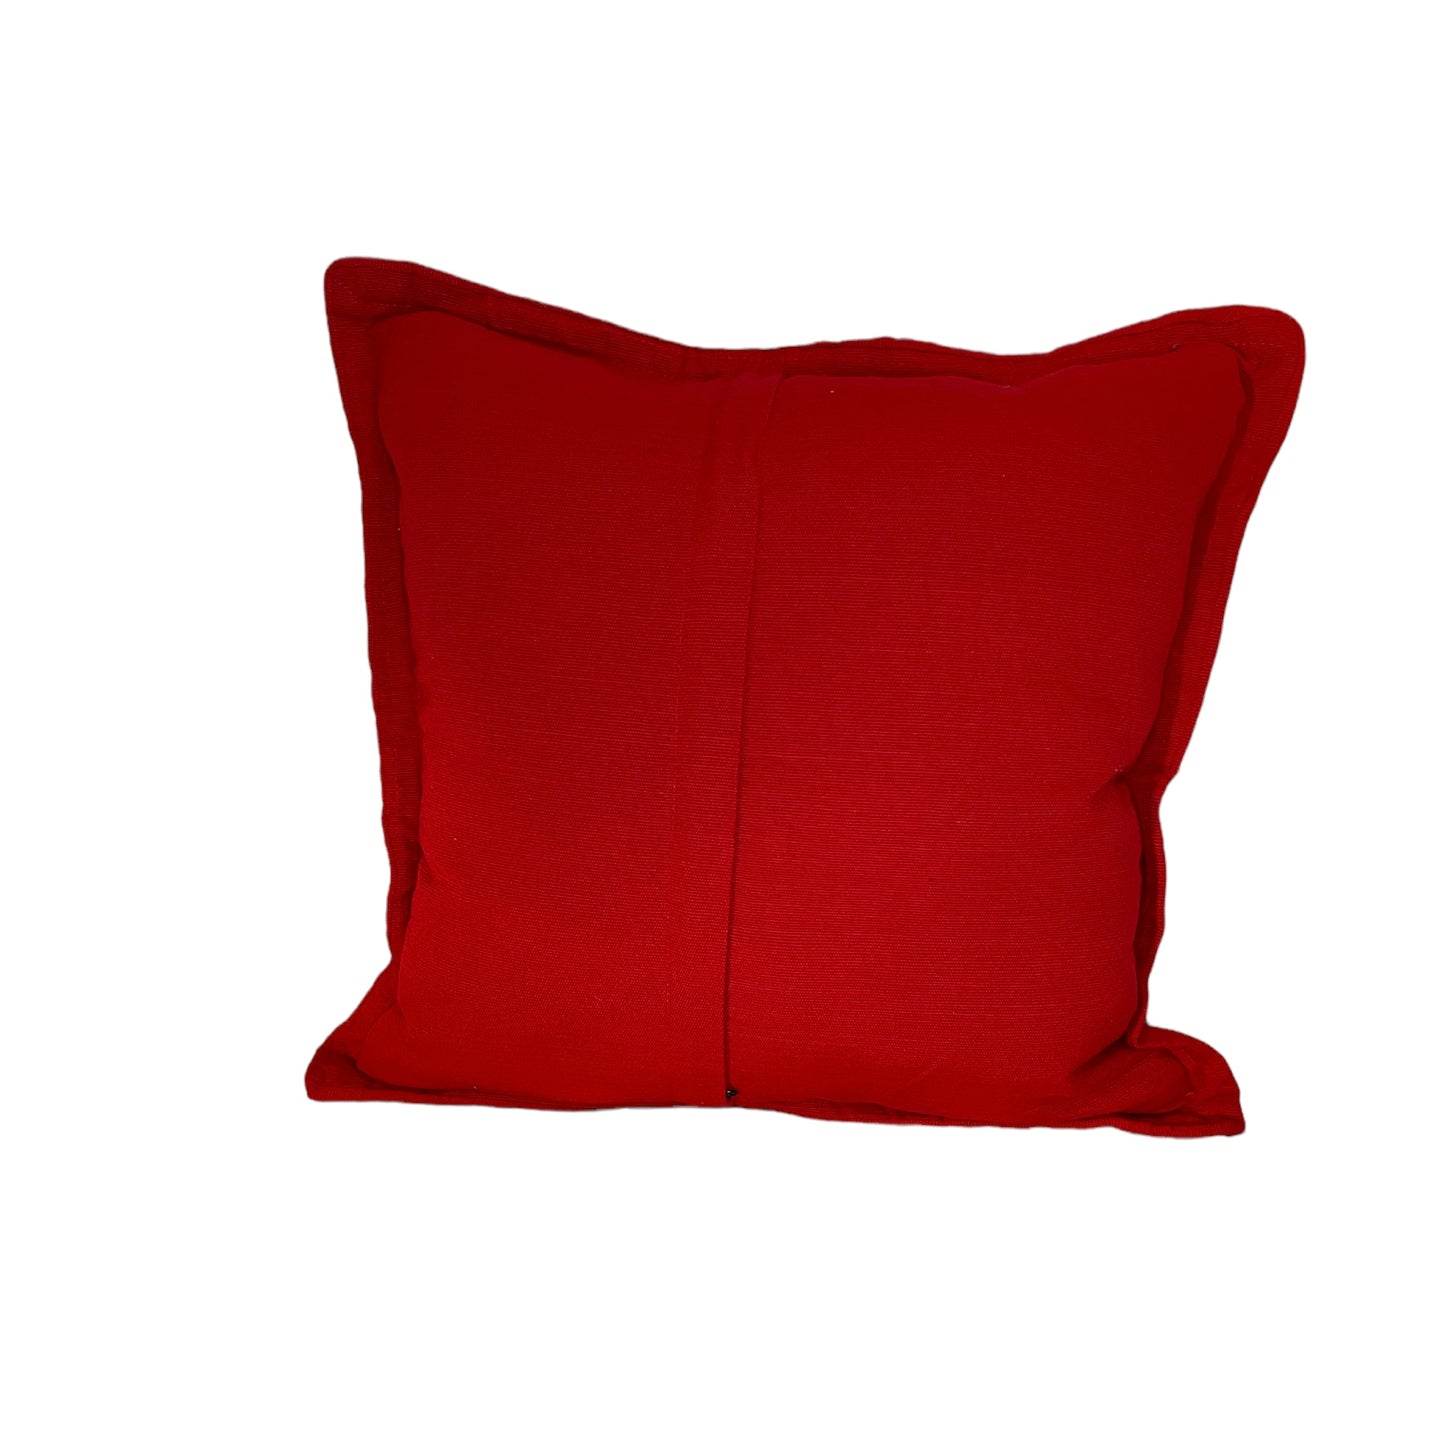 18 x 18 Red Pillow Cover